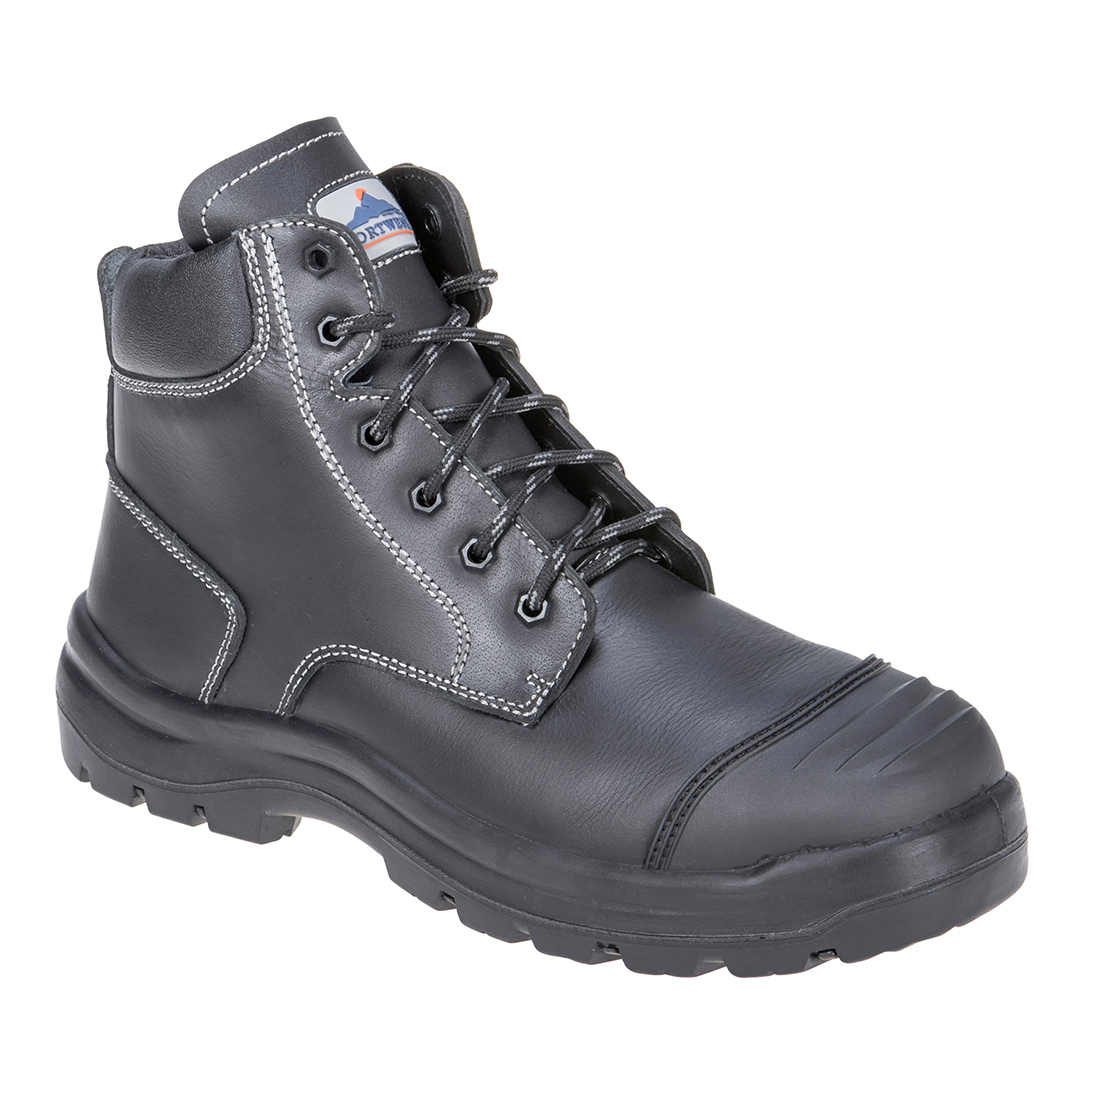 Clyde Safety Boot S3 HRO CI HI FO - Black